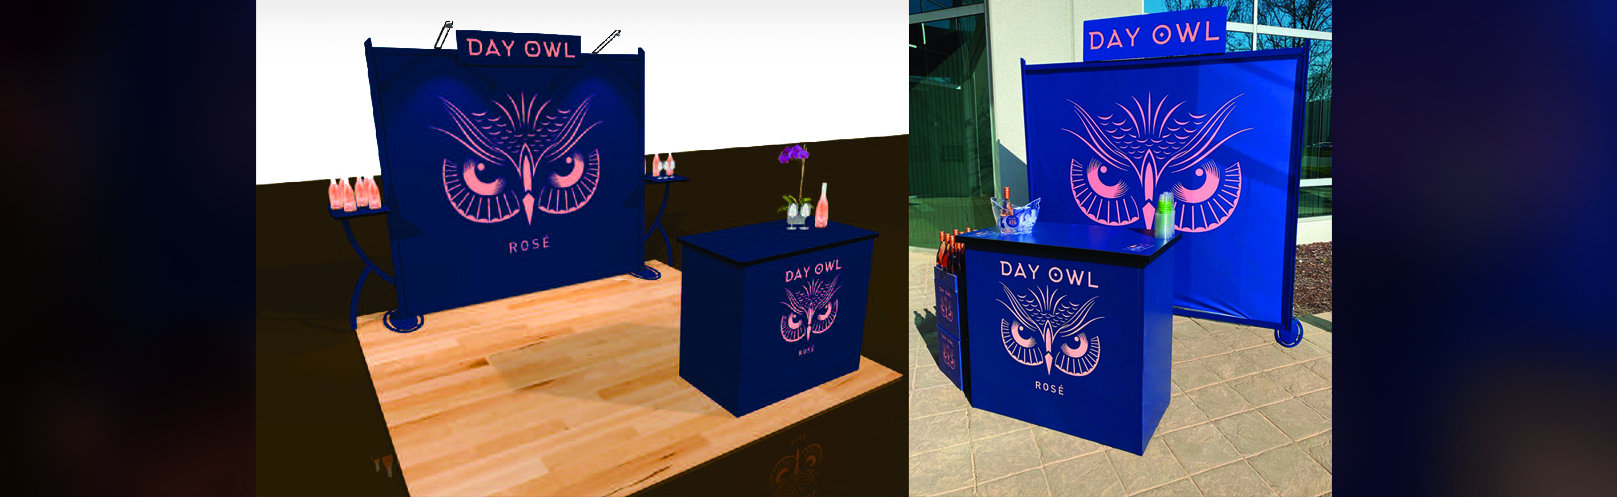 Side-by-side Rendering and actual Tradeshow display for Day Owl Rose.